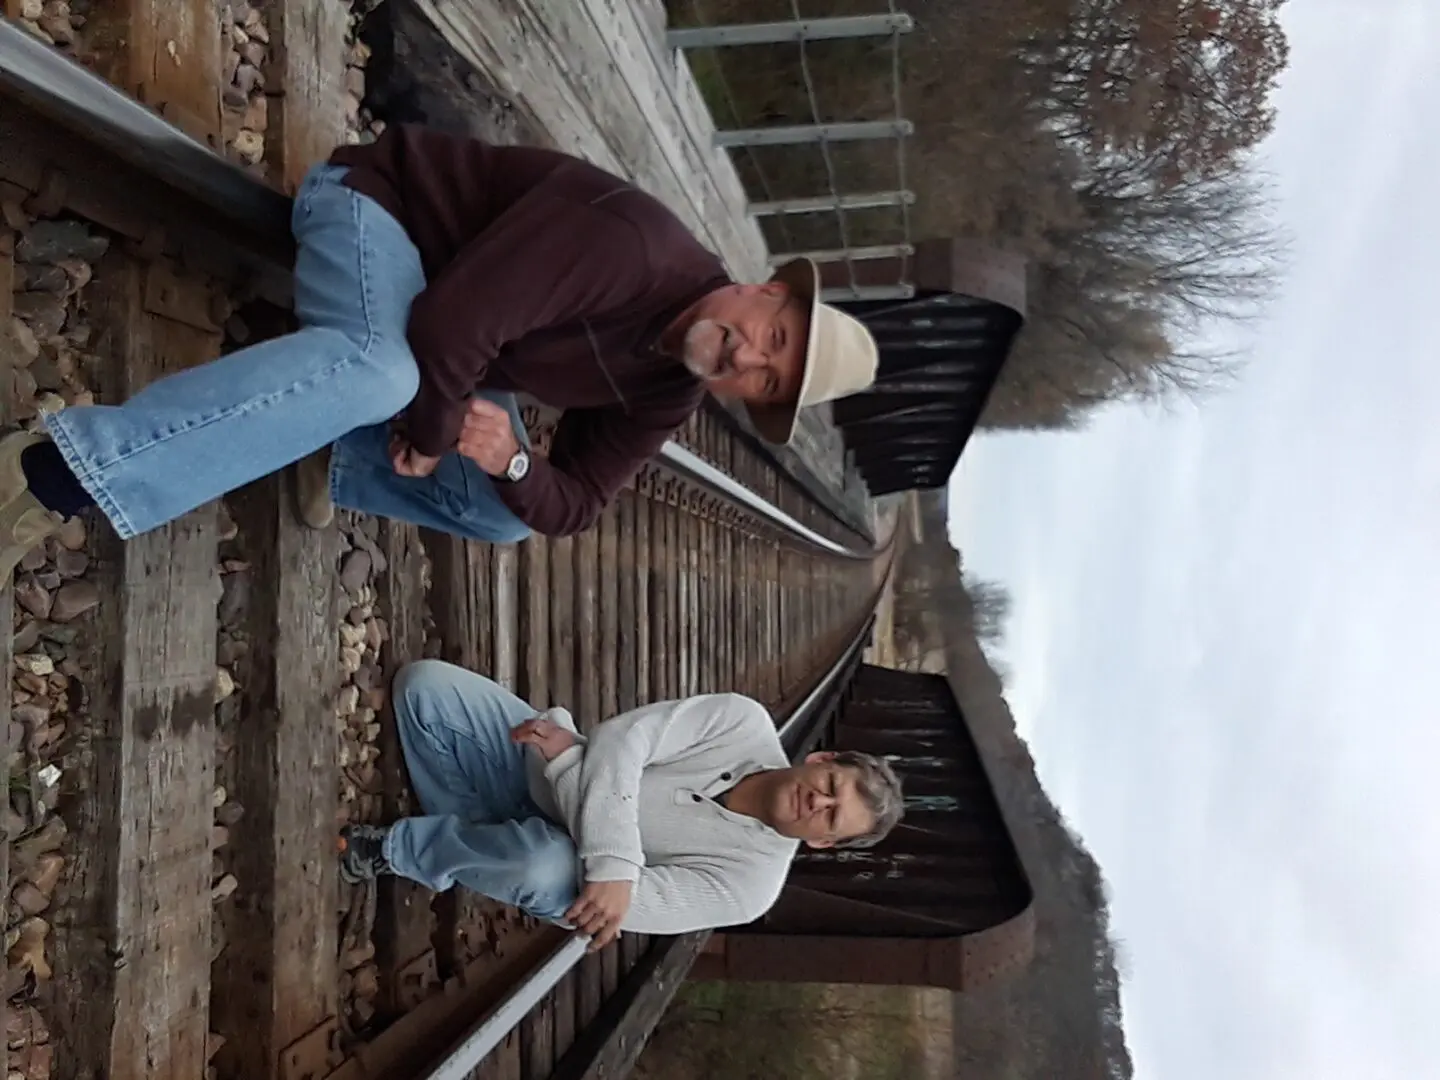 Two men posing on a railroad track.